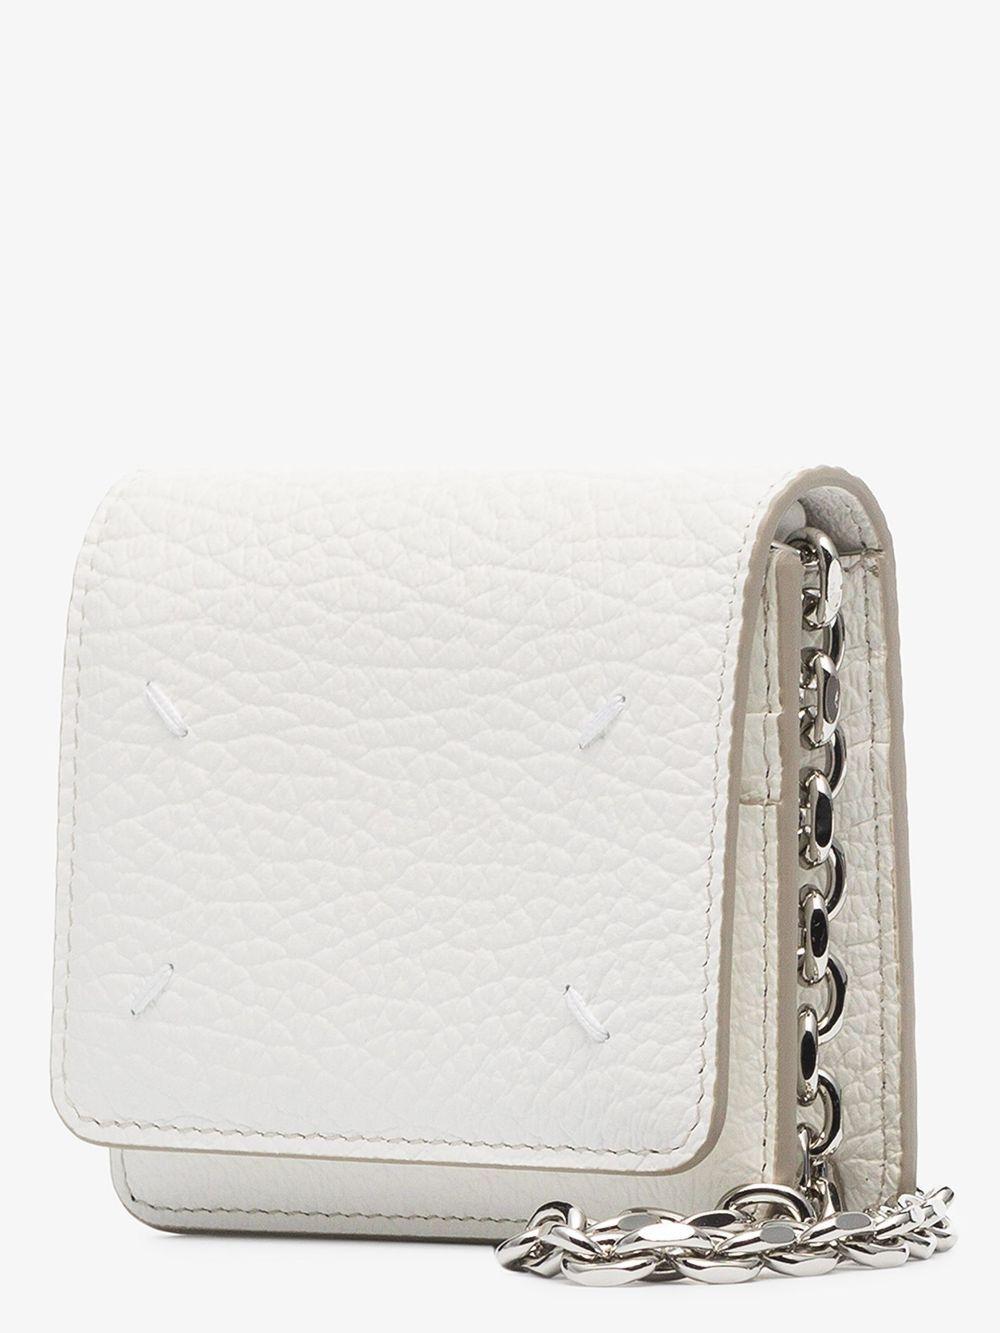 Maison Margiela Leather Chain Strap Wallet in White - Save 9% - Lyst